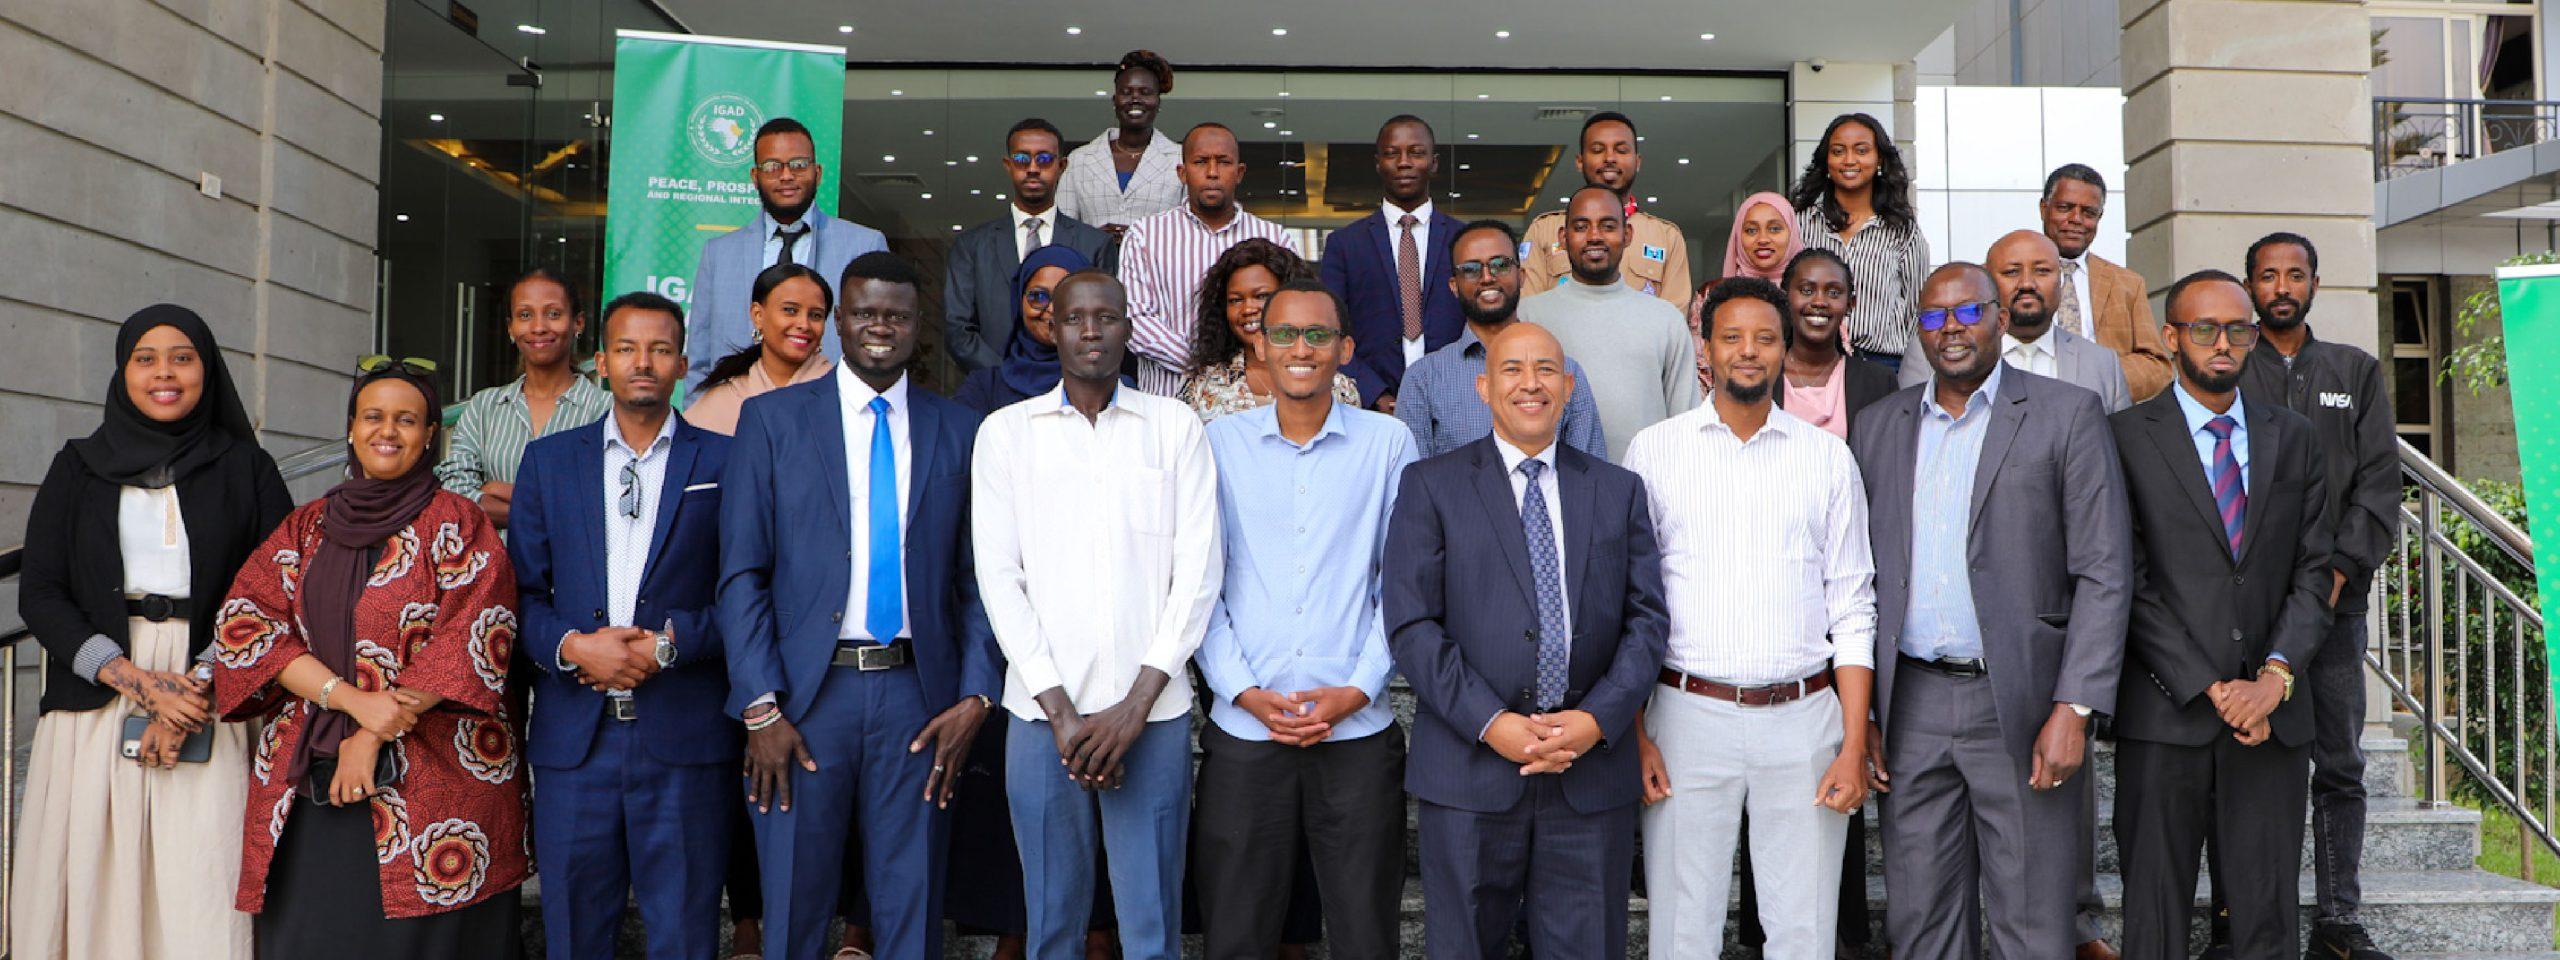 IGAD Builds Capacities of Member States’ Youth Leaders in a Training Workshop on Conflict Prevention, Management and Resolutions.